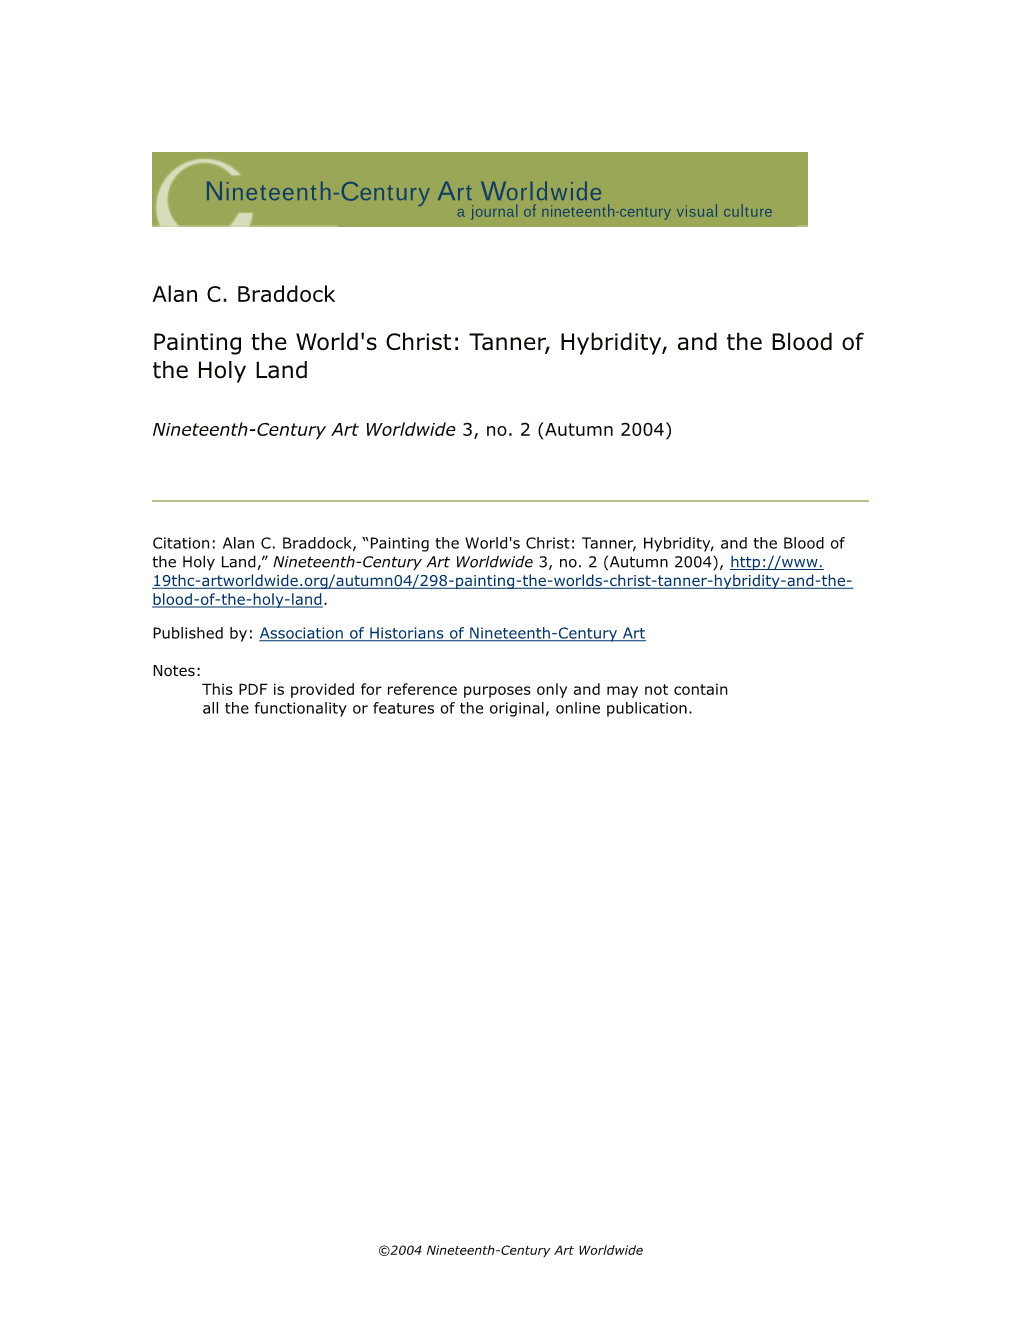 Painting the World's Christ: Tanner, Hybridity, and the Blood of the Holy Land